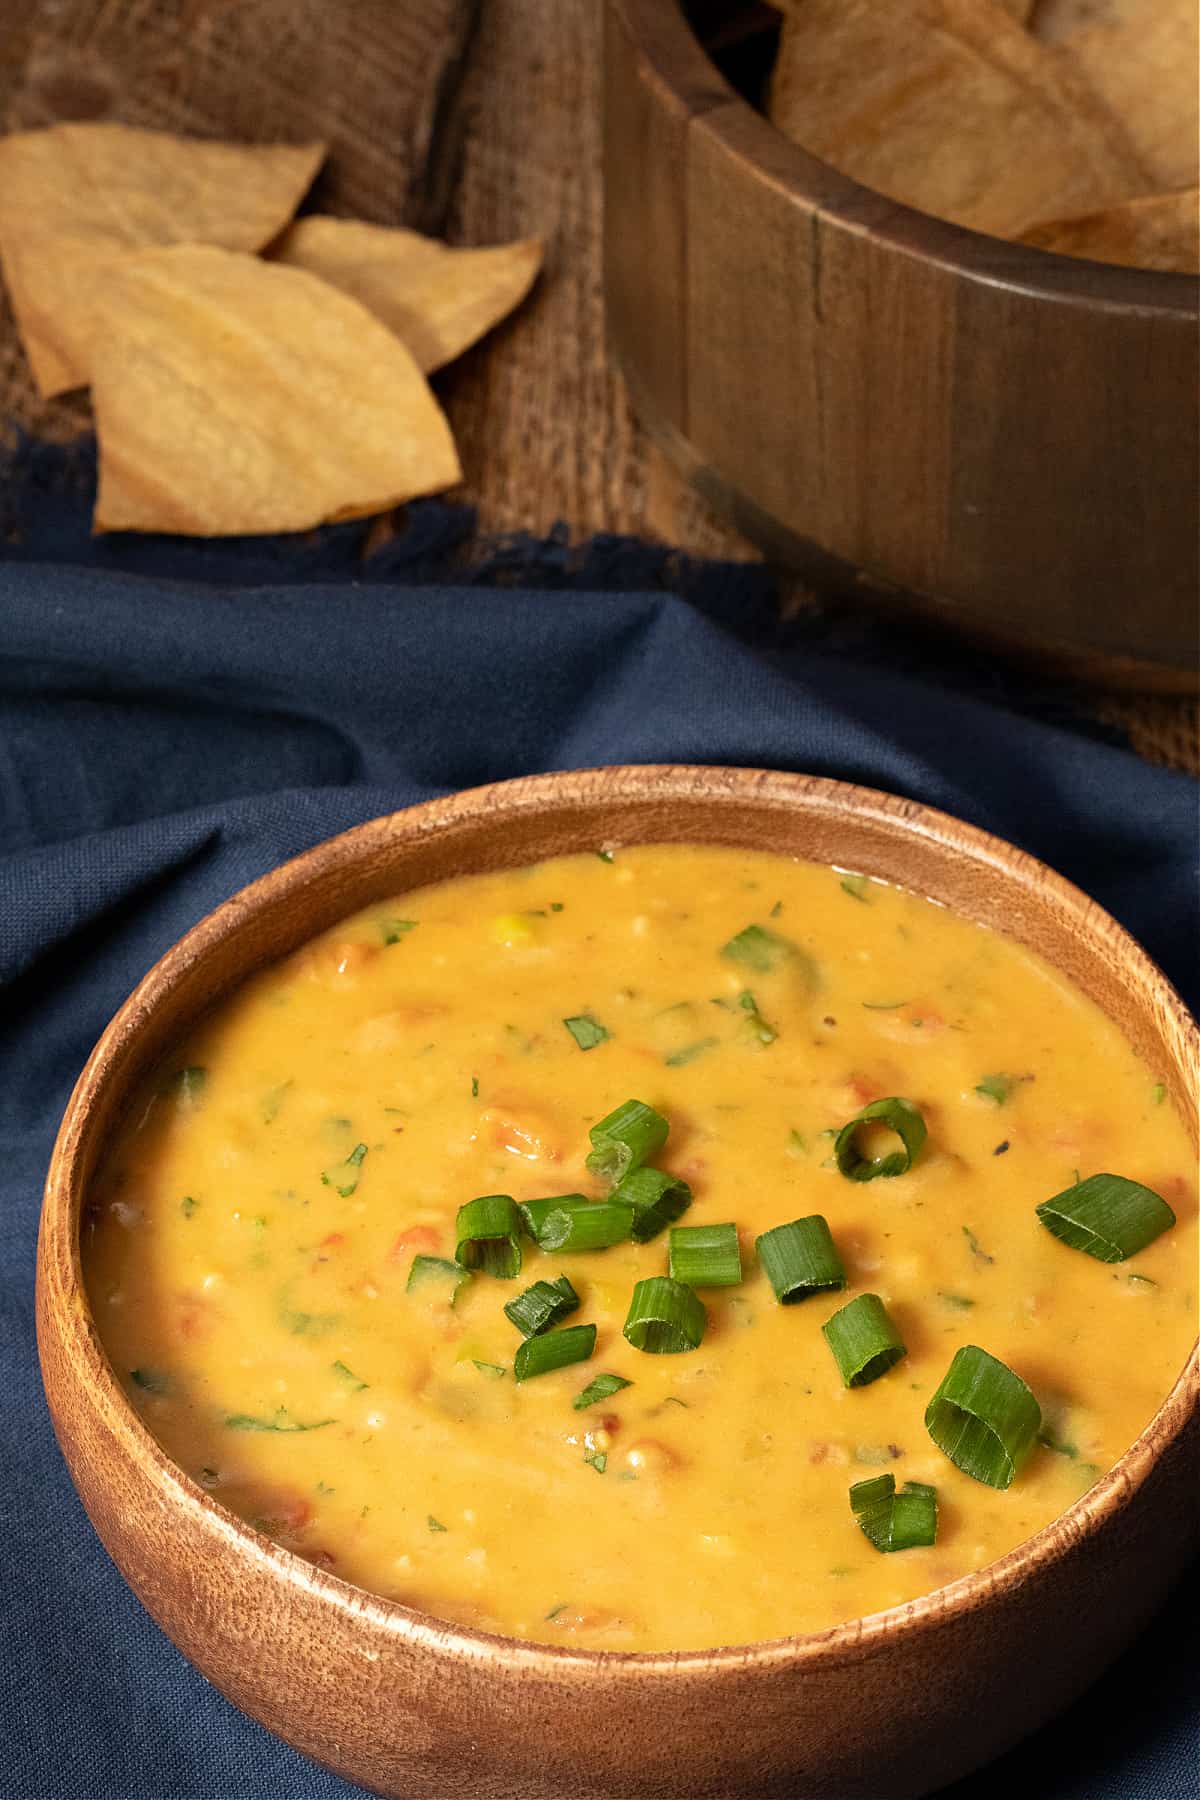 A bowl of vegan Chile cheese queso and chips